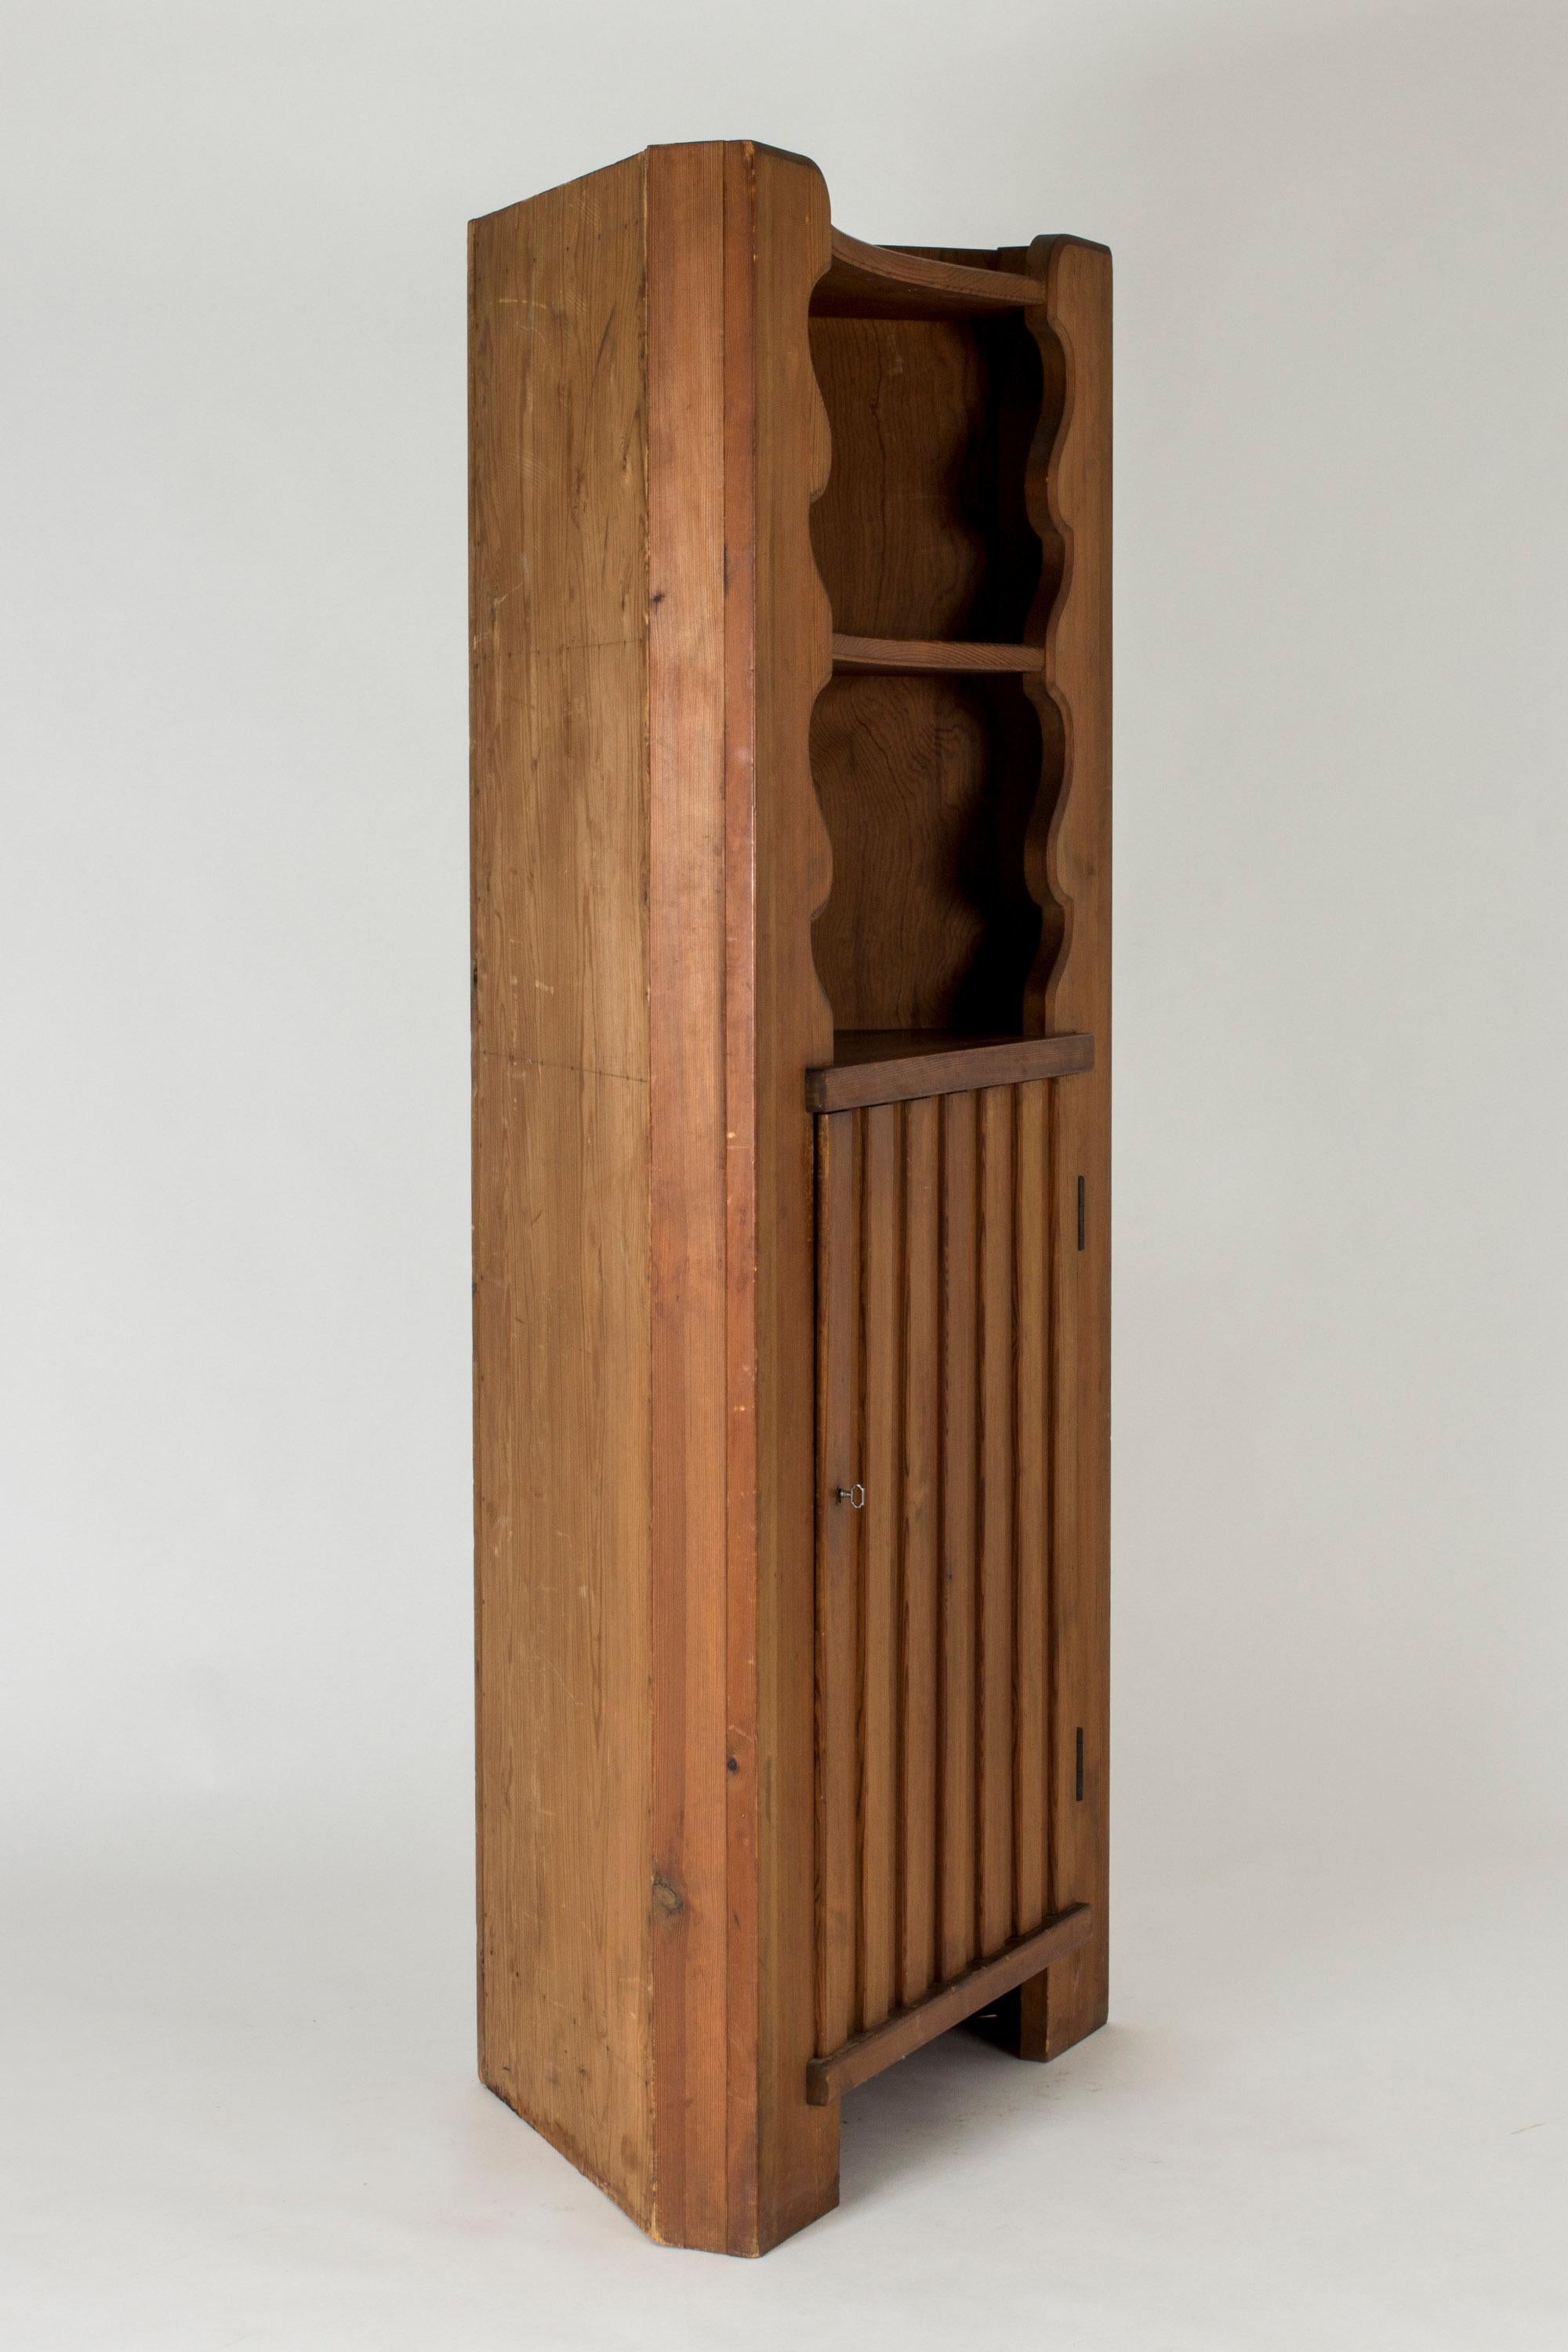 Pine corner cabinet, “Utö”, by Axel Einar Hjorth. Design included in NK’s line of “sports cabin” furniture. Carefully executed rustic expression, with beautiful wavy decor framing the top shelves.